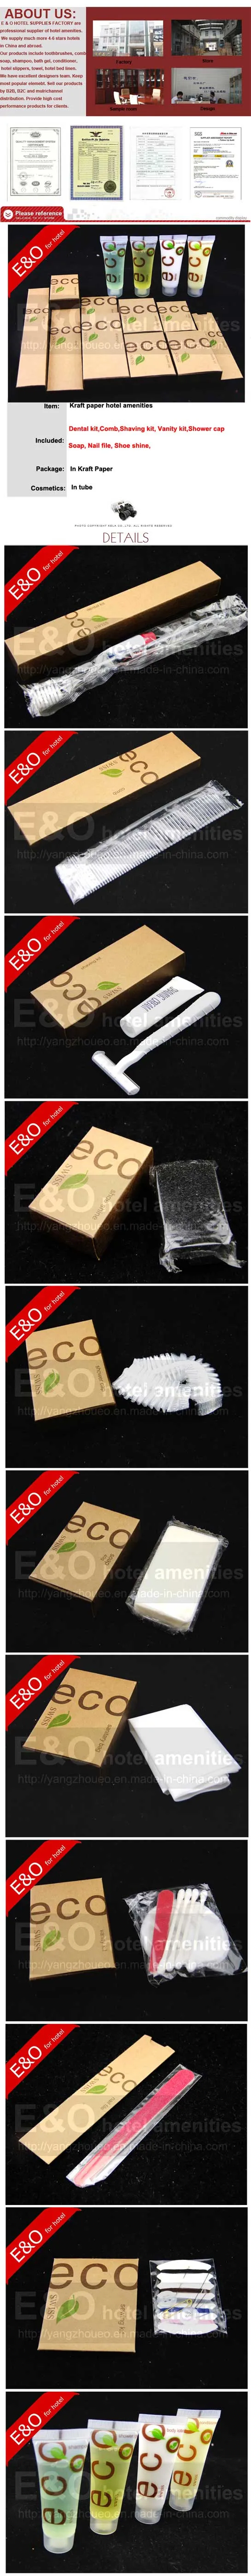 Disposable Hot Sale Eco Hotel Amenities Set with Kraft Paper Package